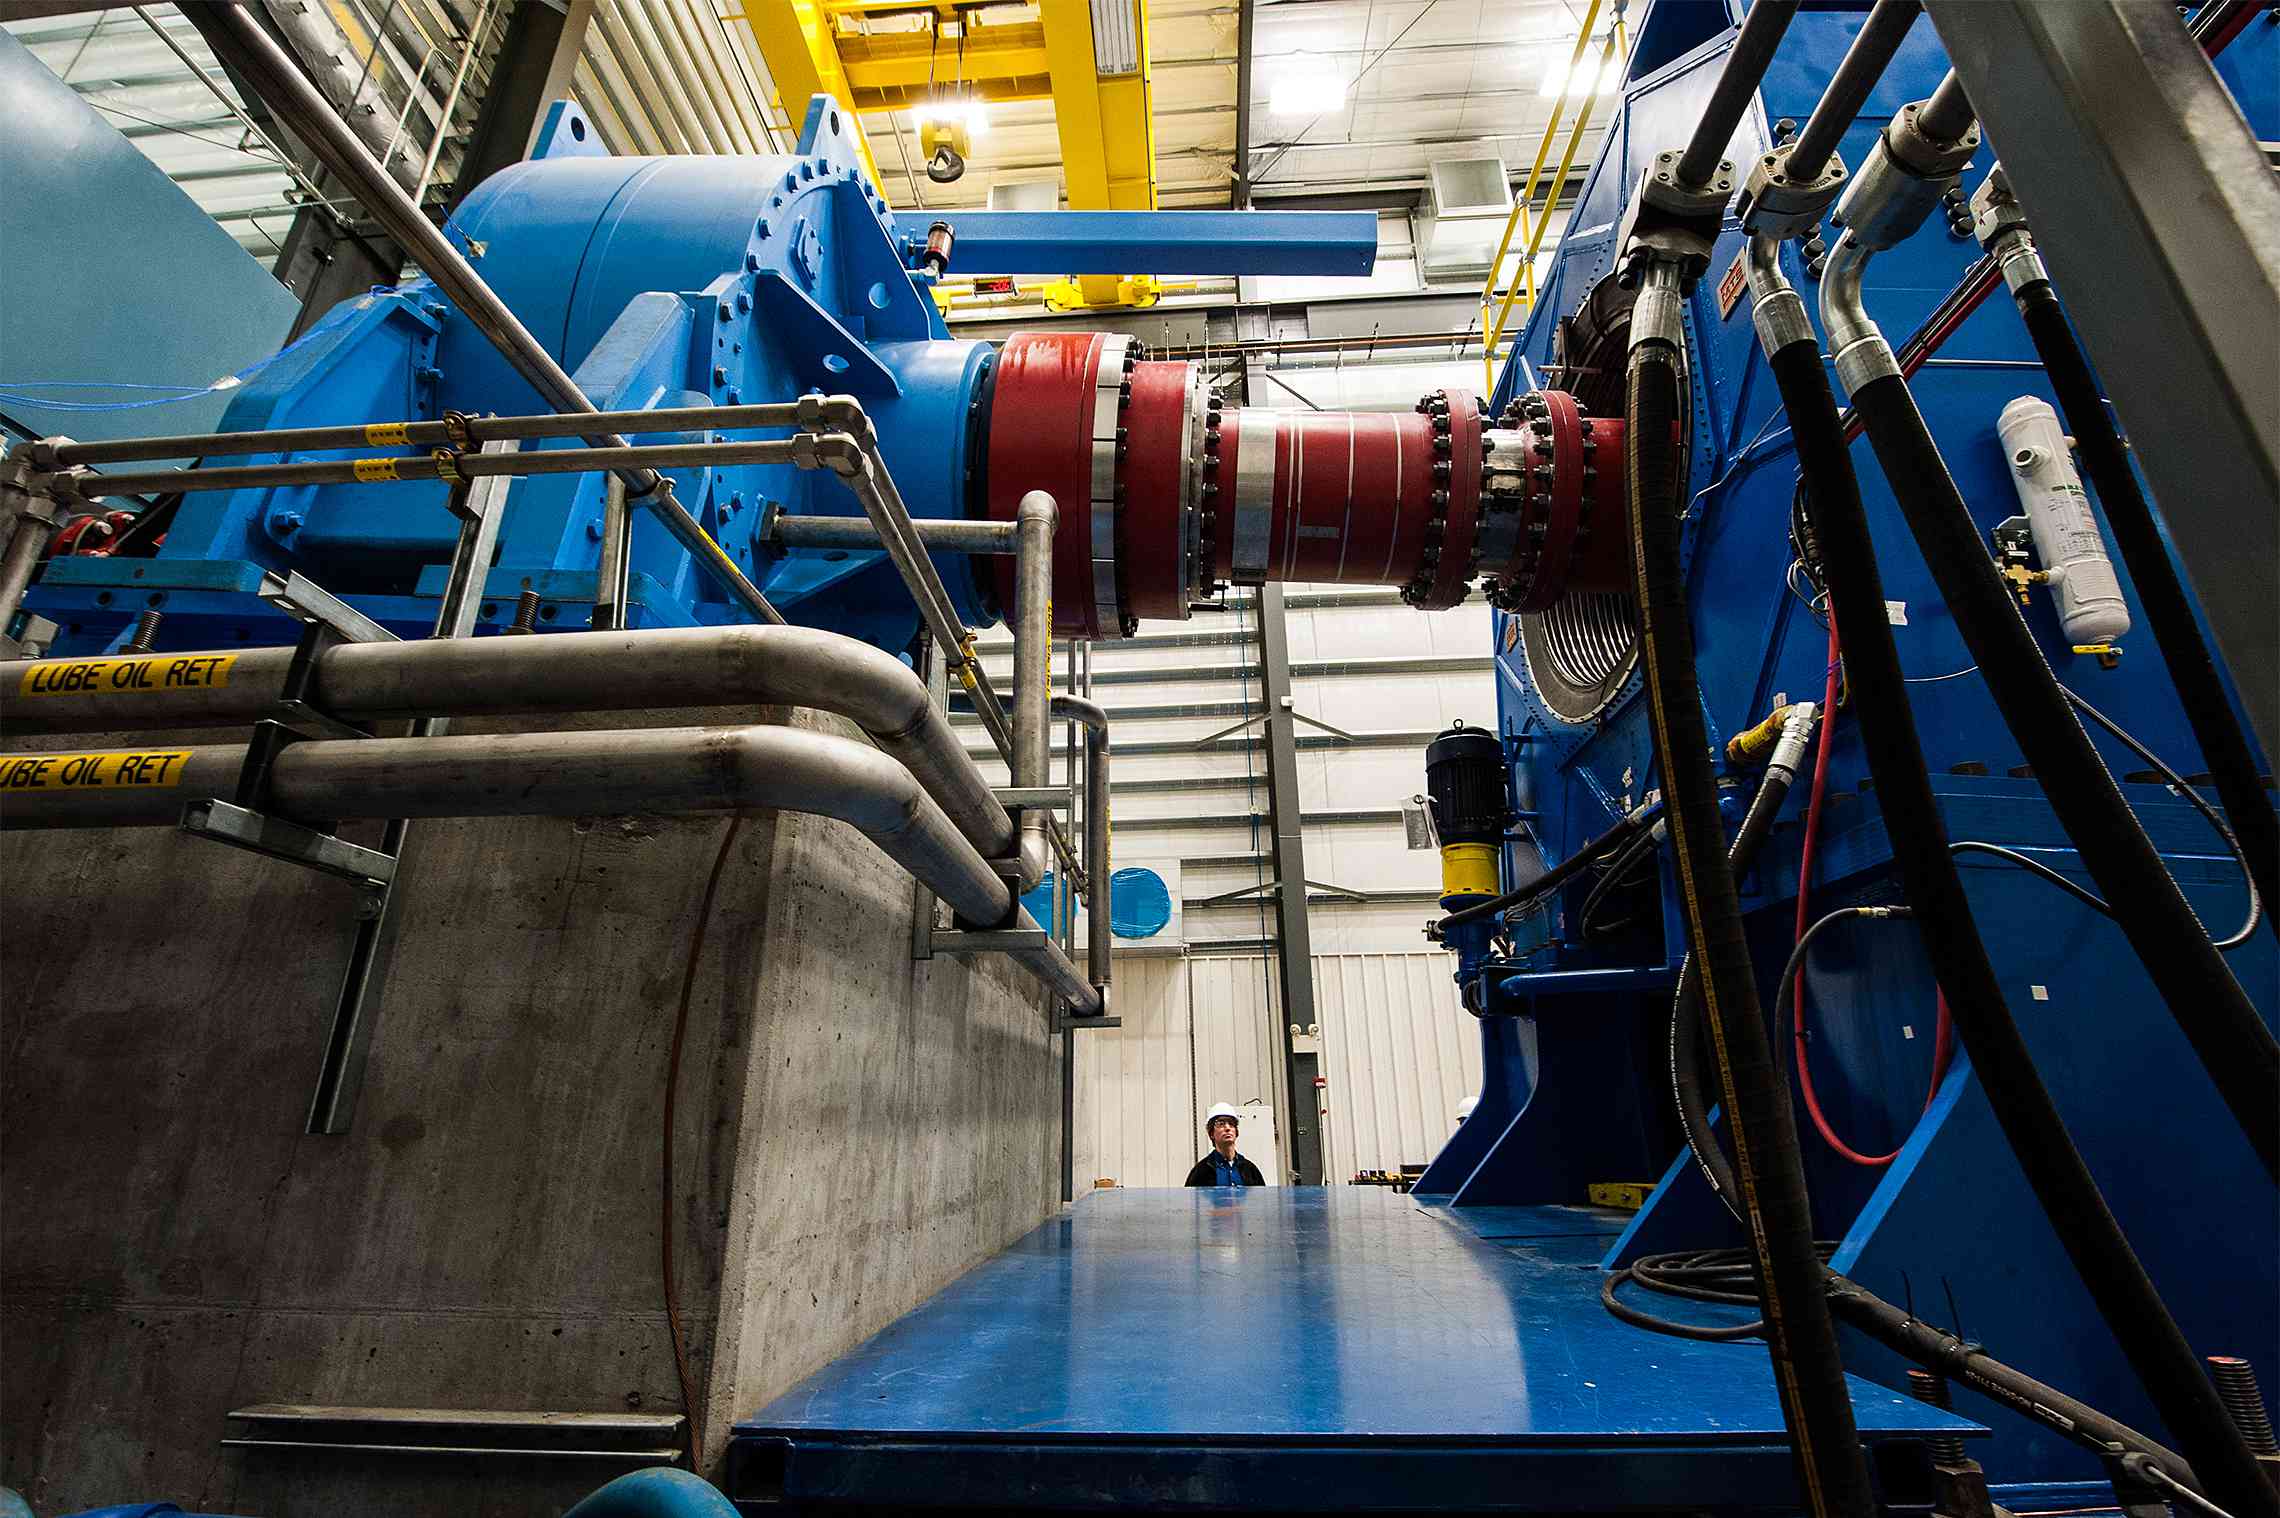 Photo of large blue and red test machinery with a man looking up at it.